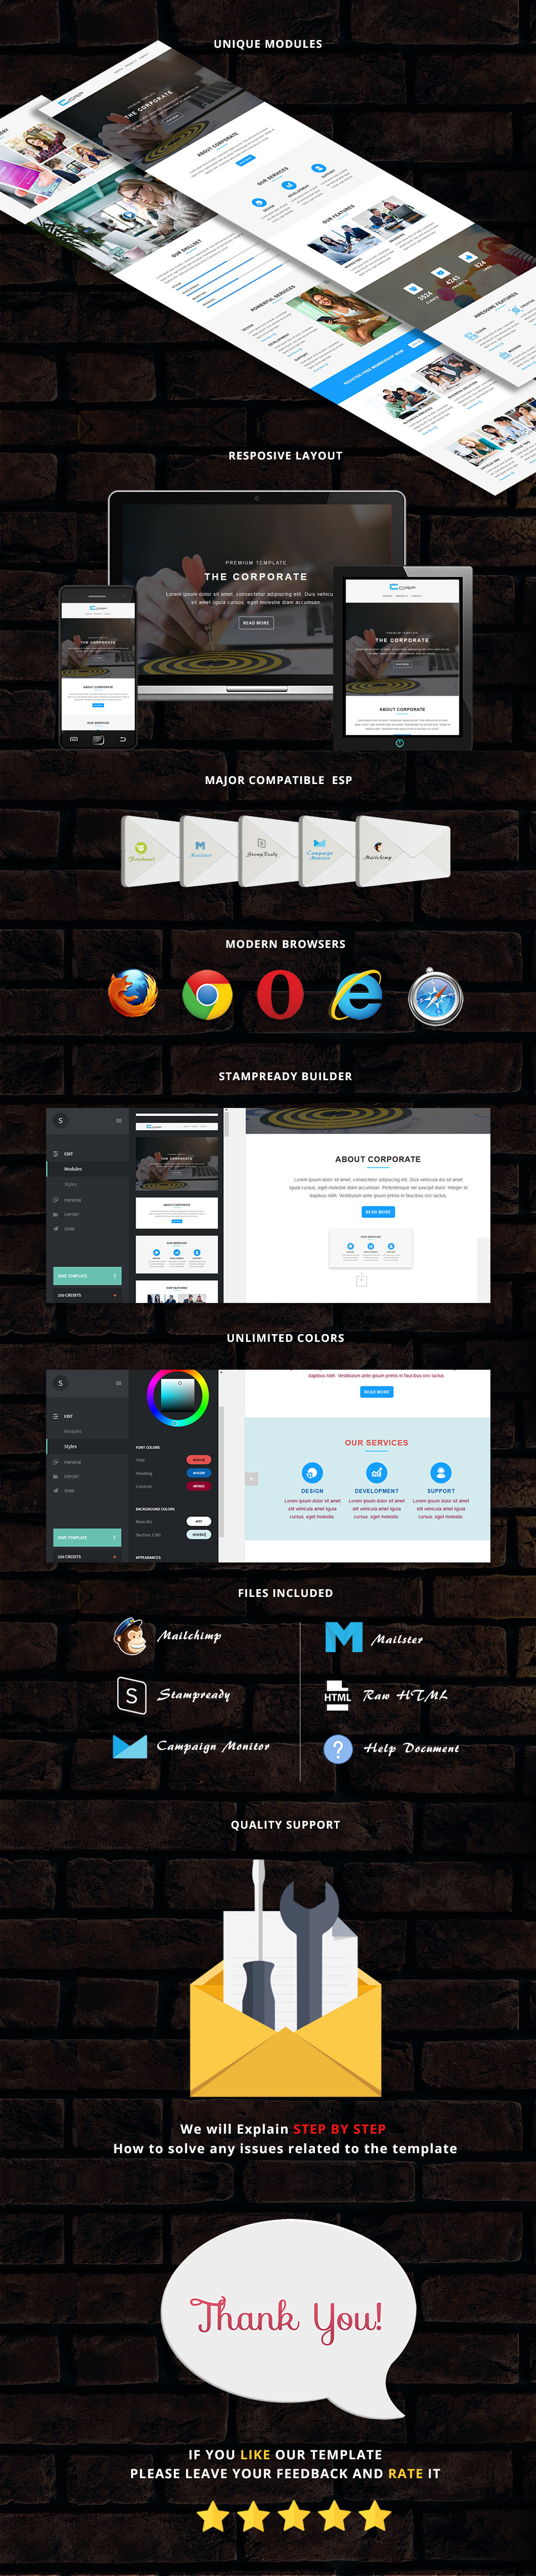 Corp - Responsive Email Template + Stampready Builder